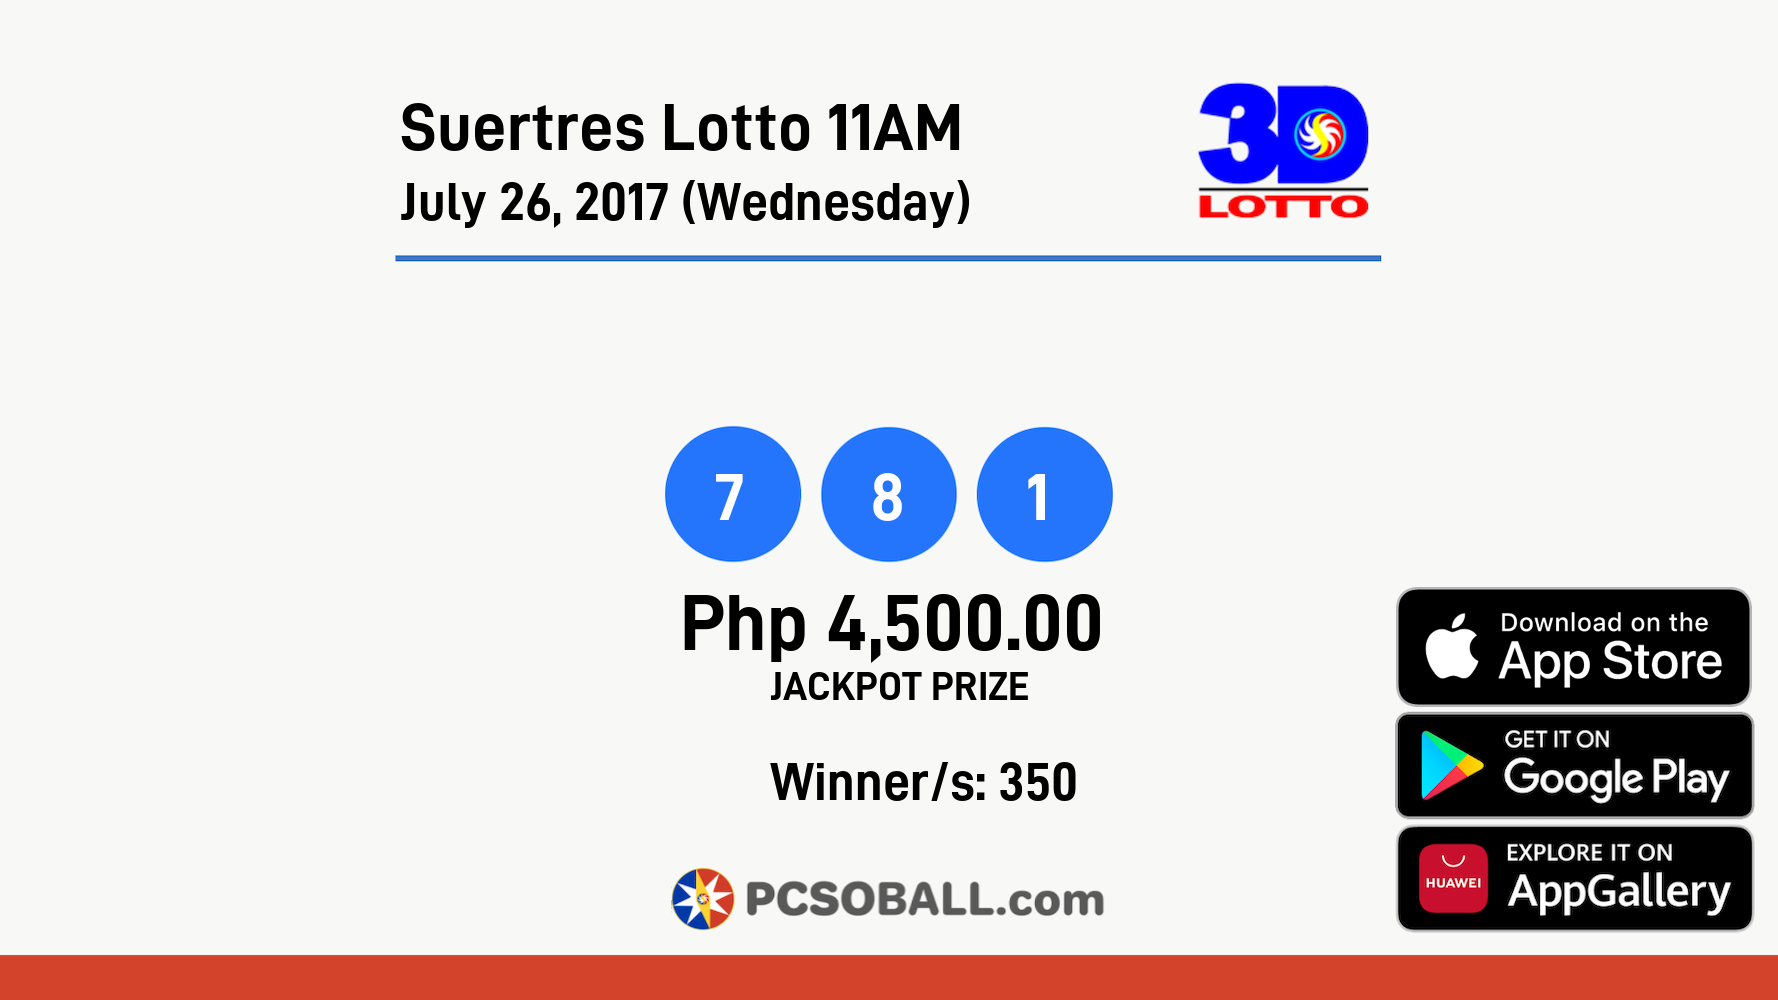 Suertres Lotto 11AM July 26, 2017 (Wednesday) Result